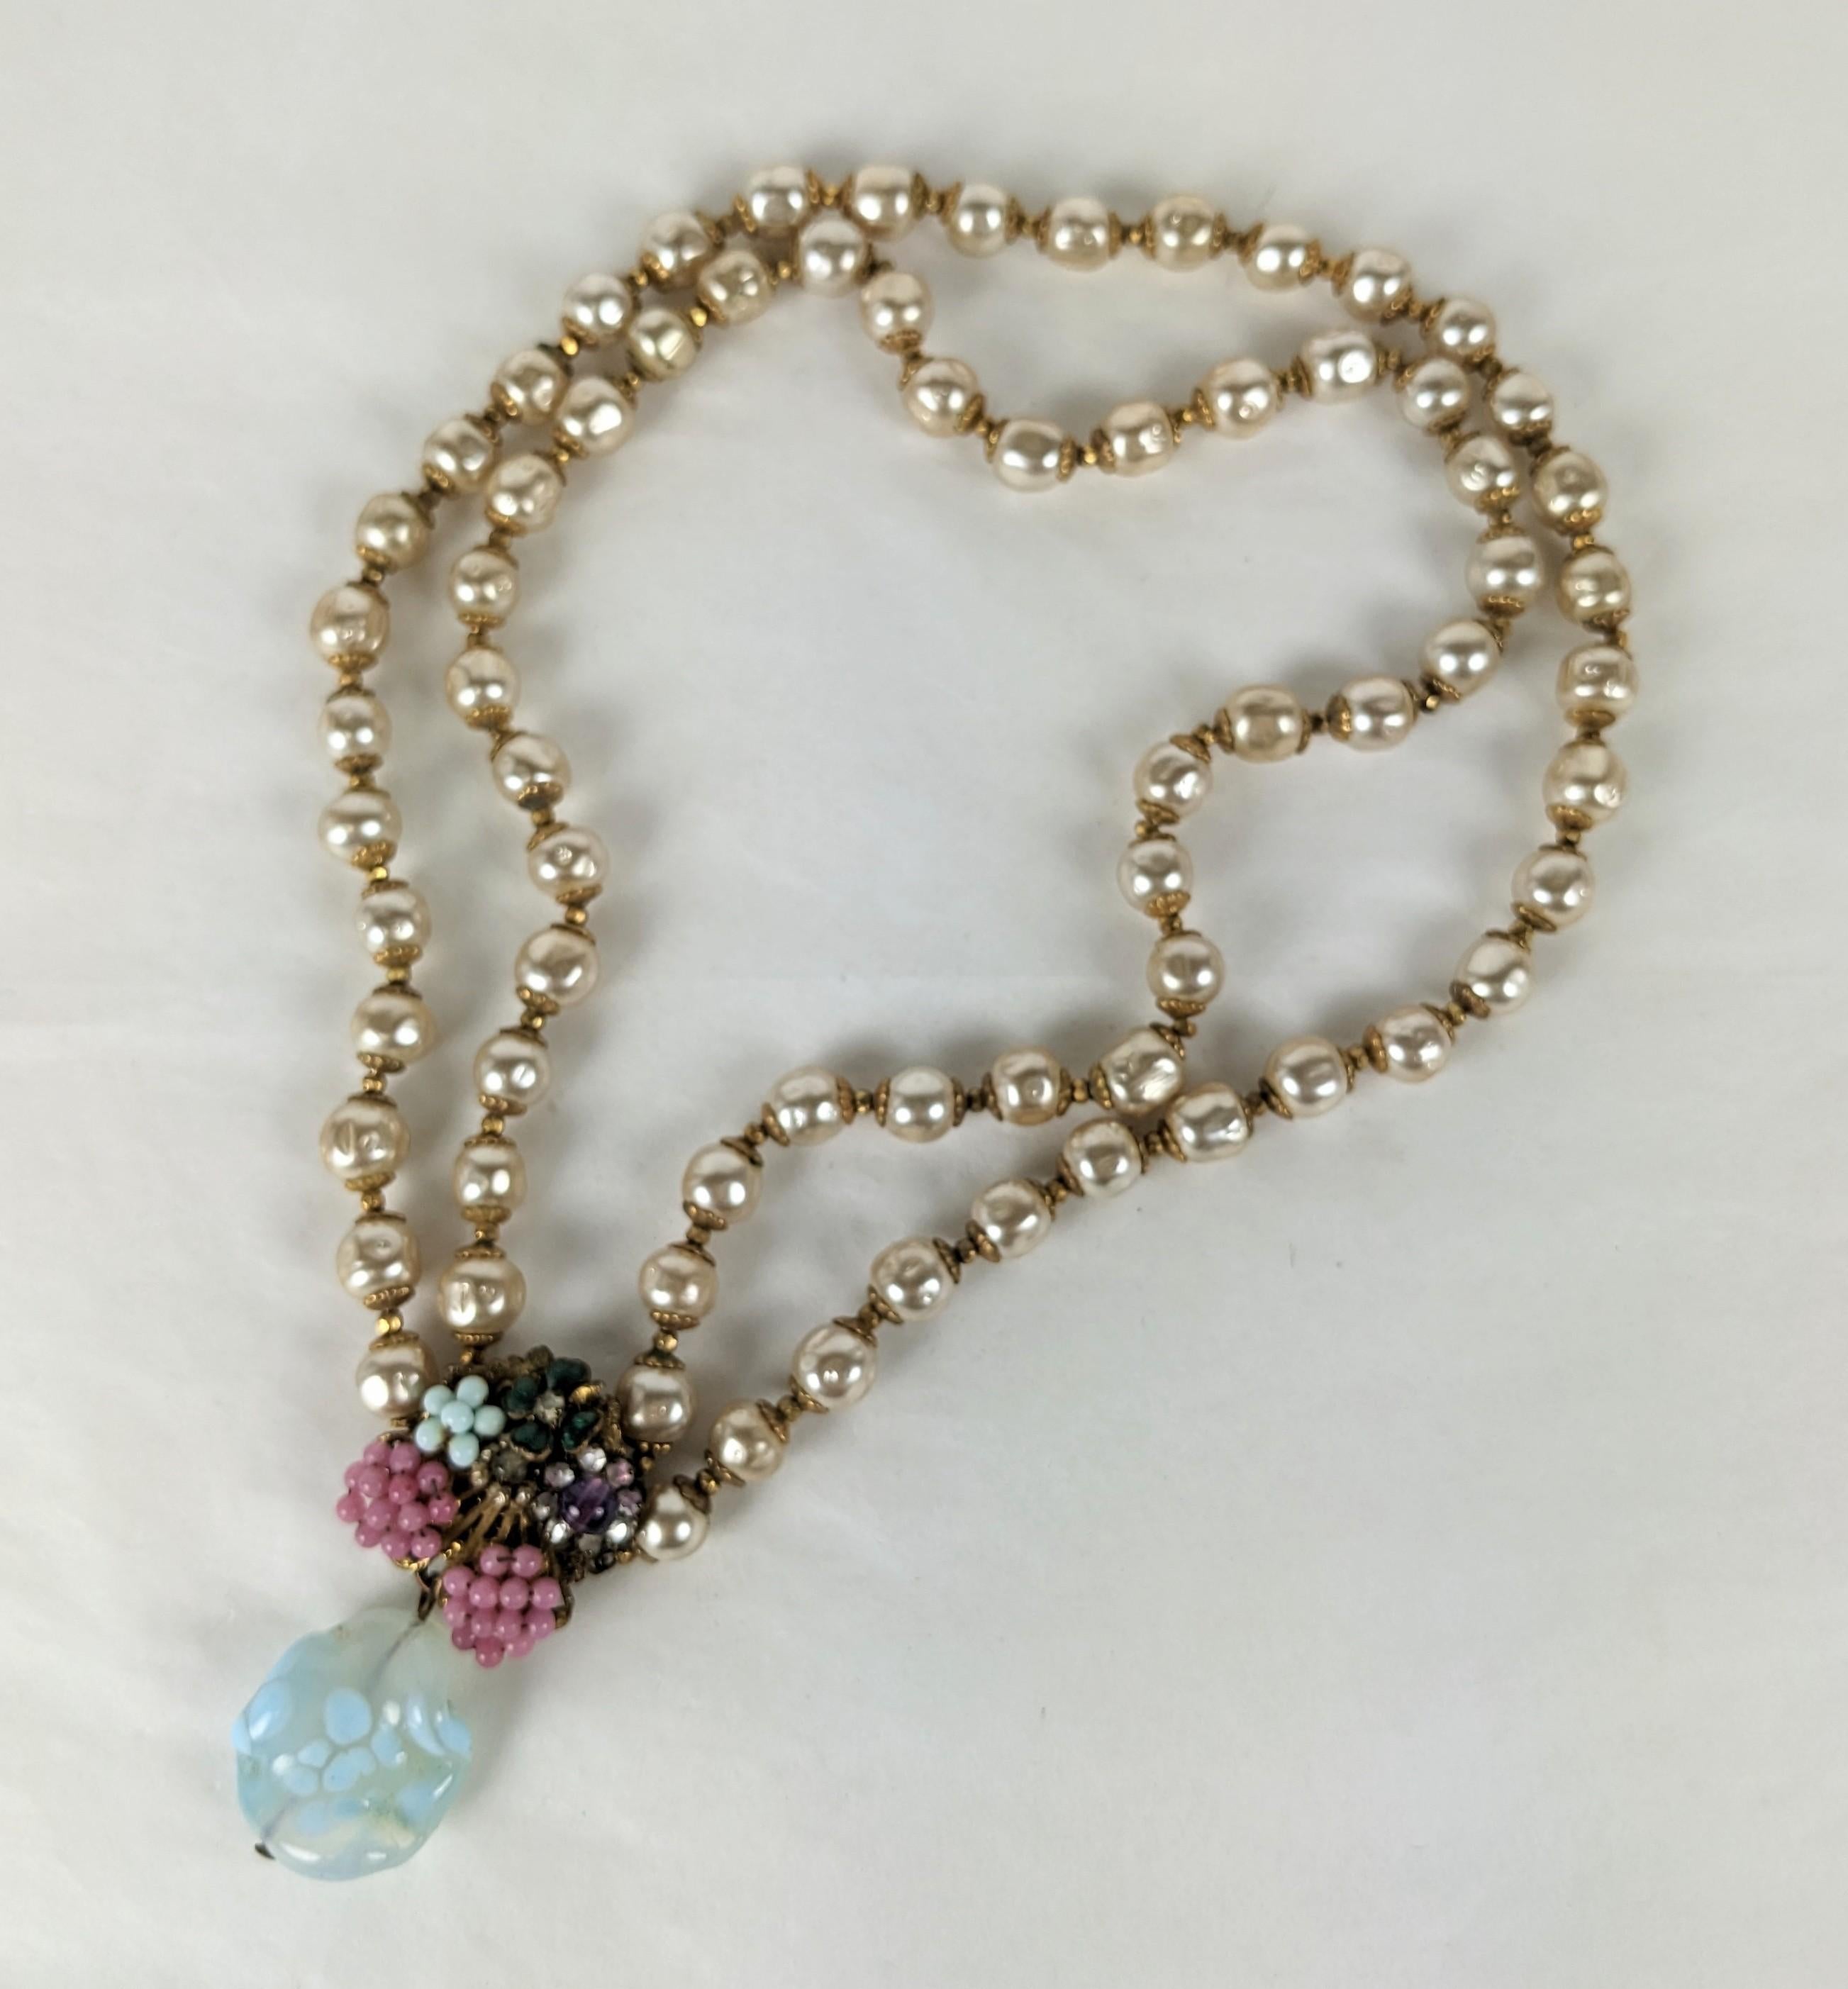 Miriam Haskell Pearl Necklace with Pate de Verre, Seed Pearl Pendant from the 1940's. Signature Haskell pearls with gilt spacers. The clasp forms the centerpiece with glass seed beads, enamel clover, rose montees and an aquamarine pate de verre